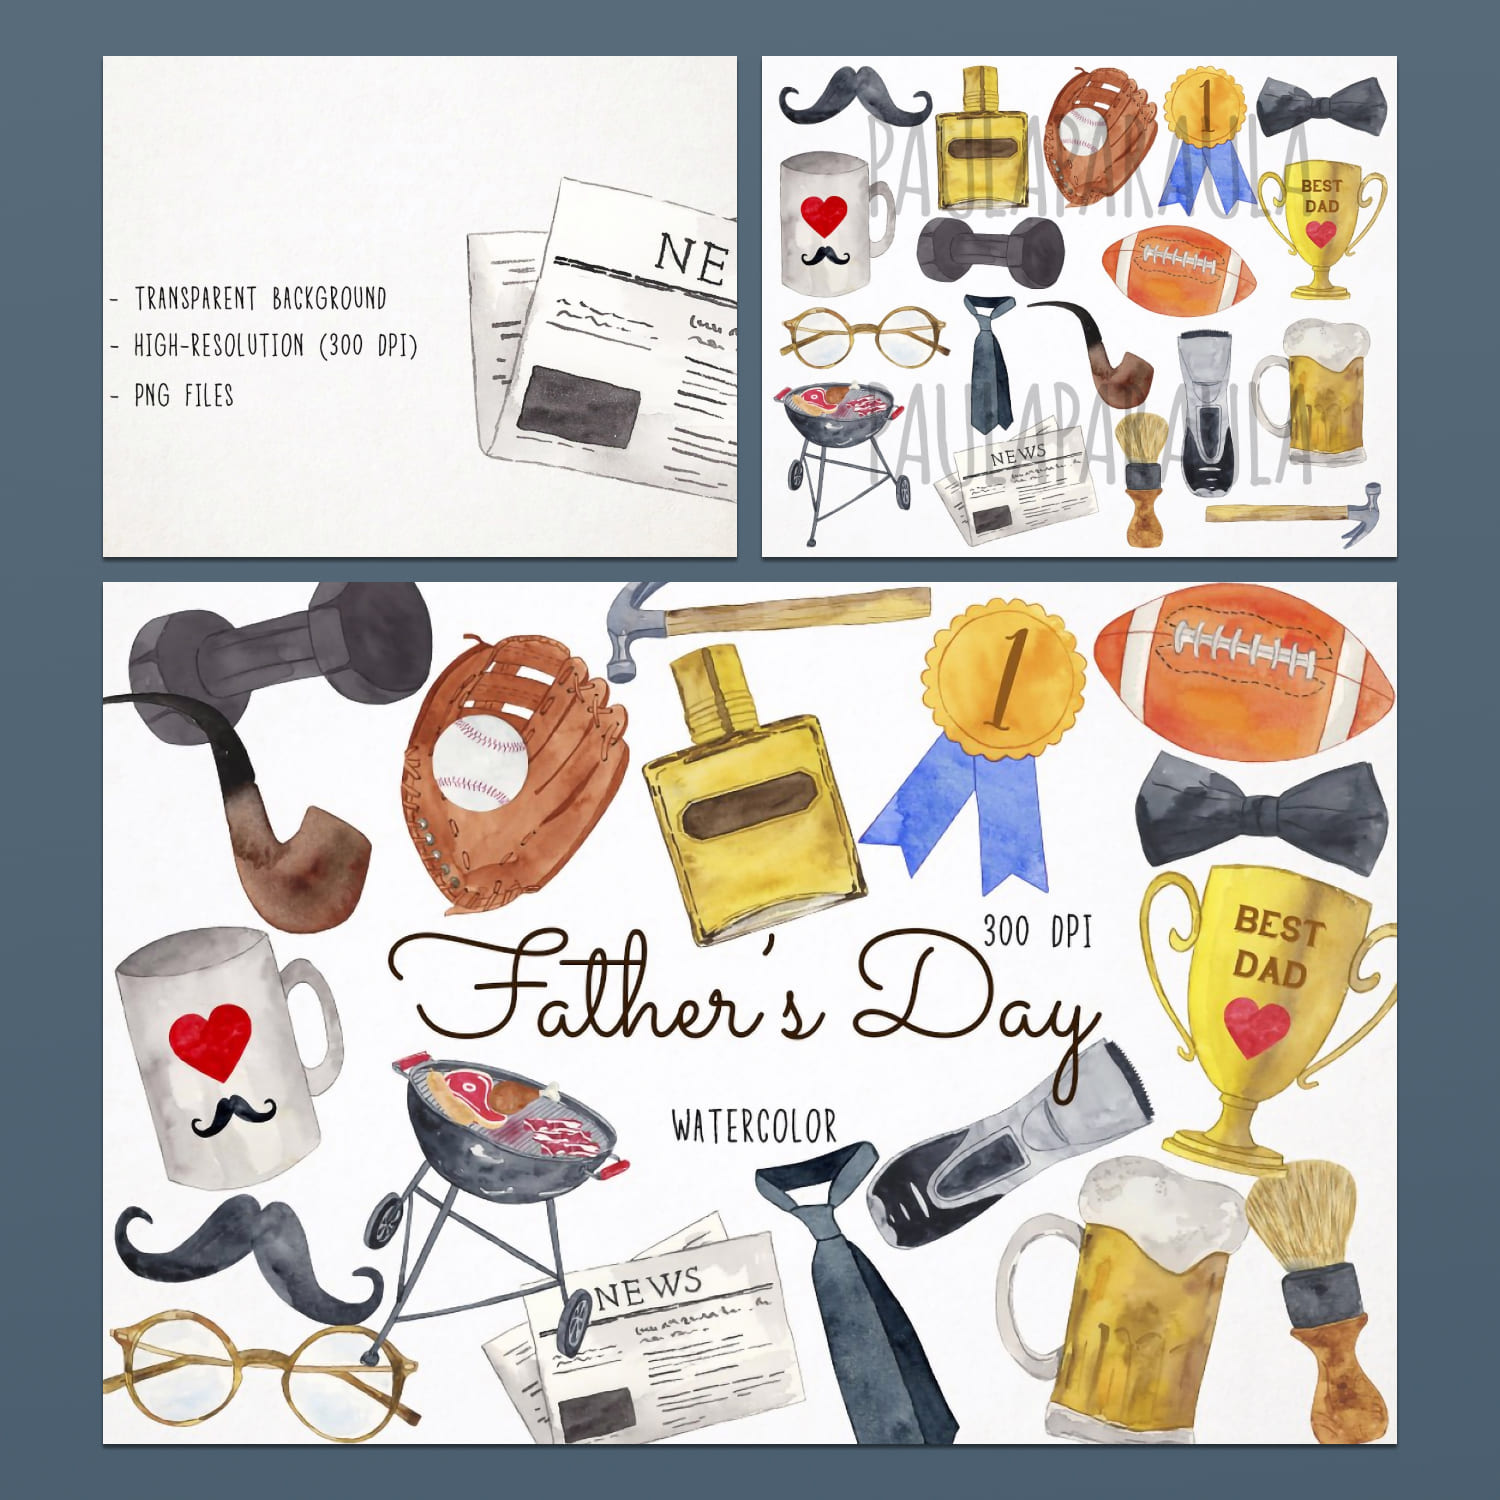 Watercolor Father's Day Clipart created by Paulaparaula.